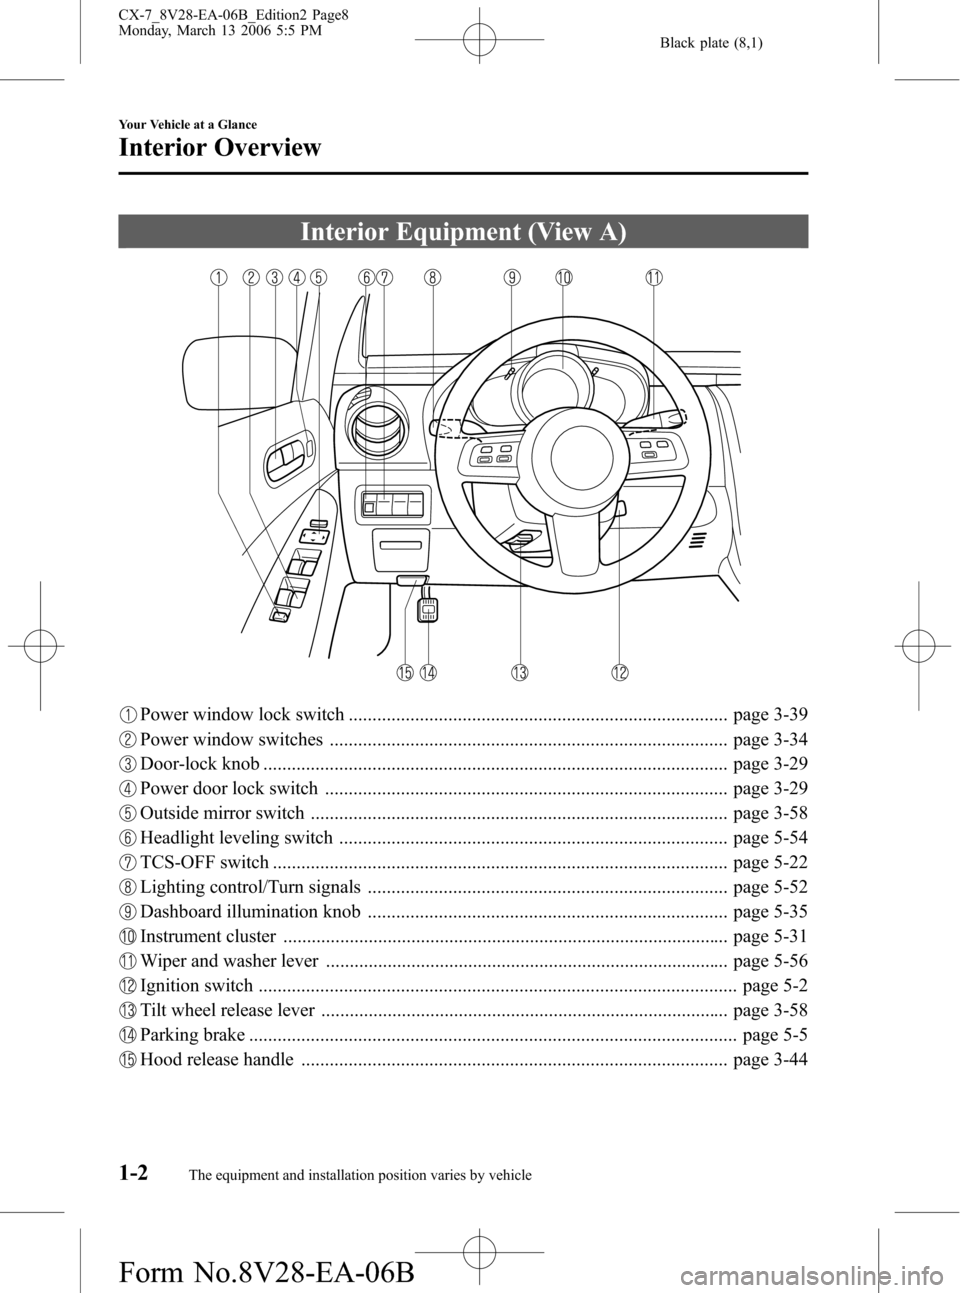 MAZDA MODEL CX-7 2007  Owners Manual (in English) Black plate (8,1)
Interior Equipment (View A)
Power window lock switch ................................................................................ page 3-39
Power window switches ................